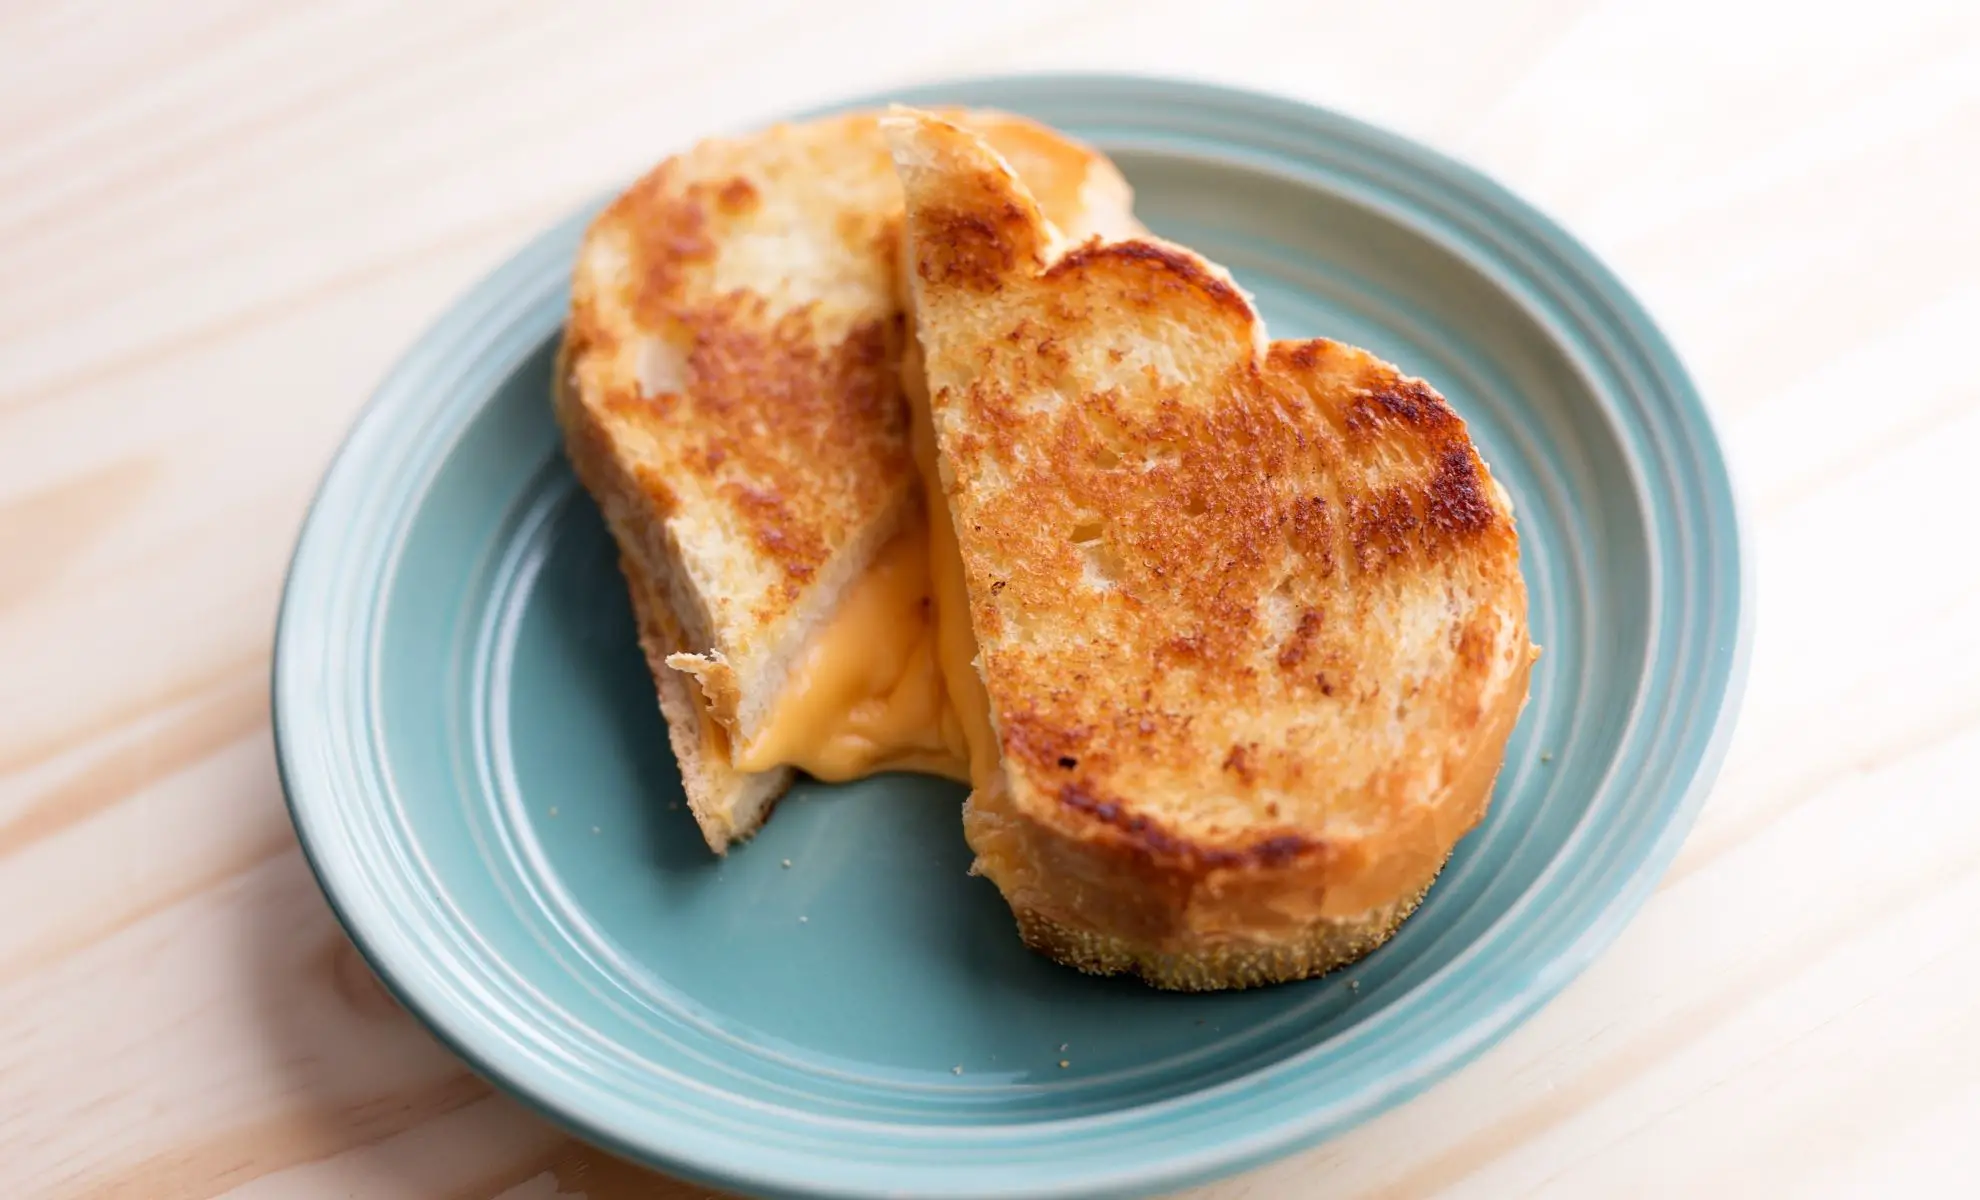 The Connection Project: Family Grilled Cheese Cook